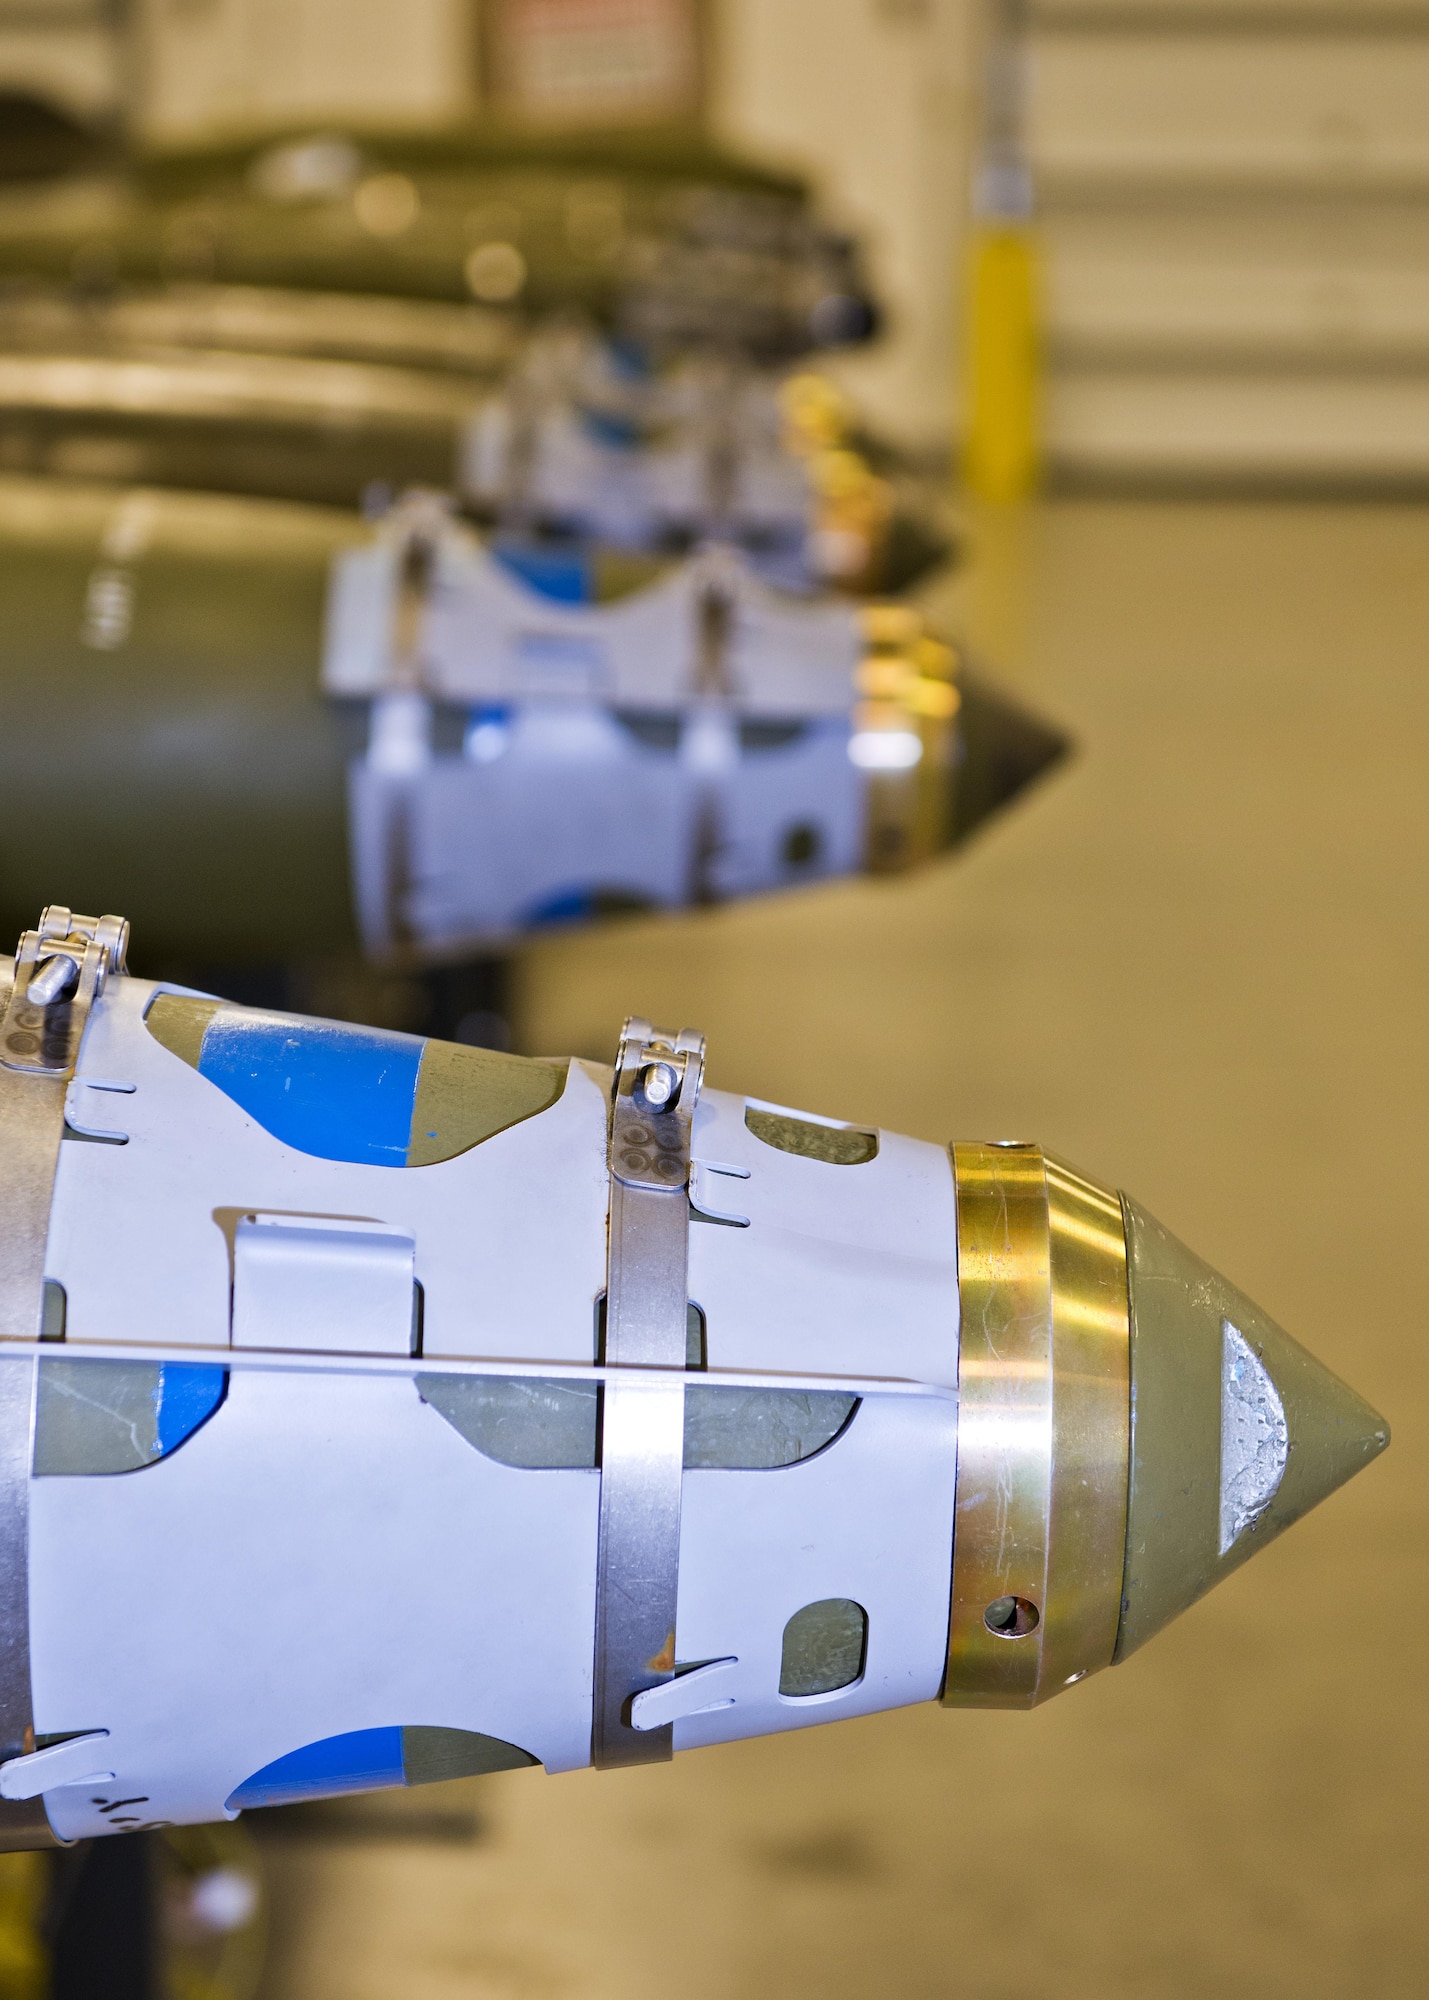 Four assembled GBU-38s line a bomb rack at Minot Air Force Base, N.D., Oct. 27, 2016. The 5th Munitions Squadron is responsible for assembling, testing and inspecting conventional munitions for the 5th Bomb Wing’s B-52H Stratofortresses. (U.S. Air Force photo/Airman 1st Class J.T. Armstrong)